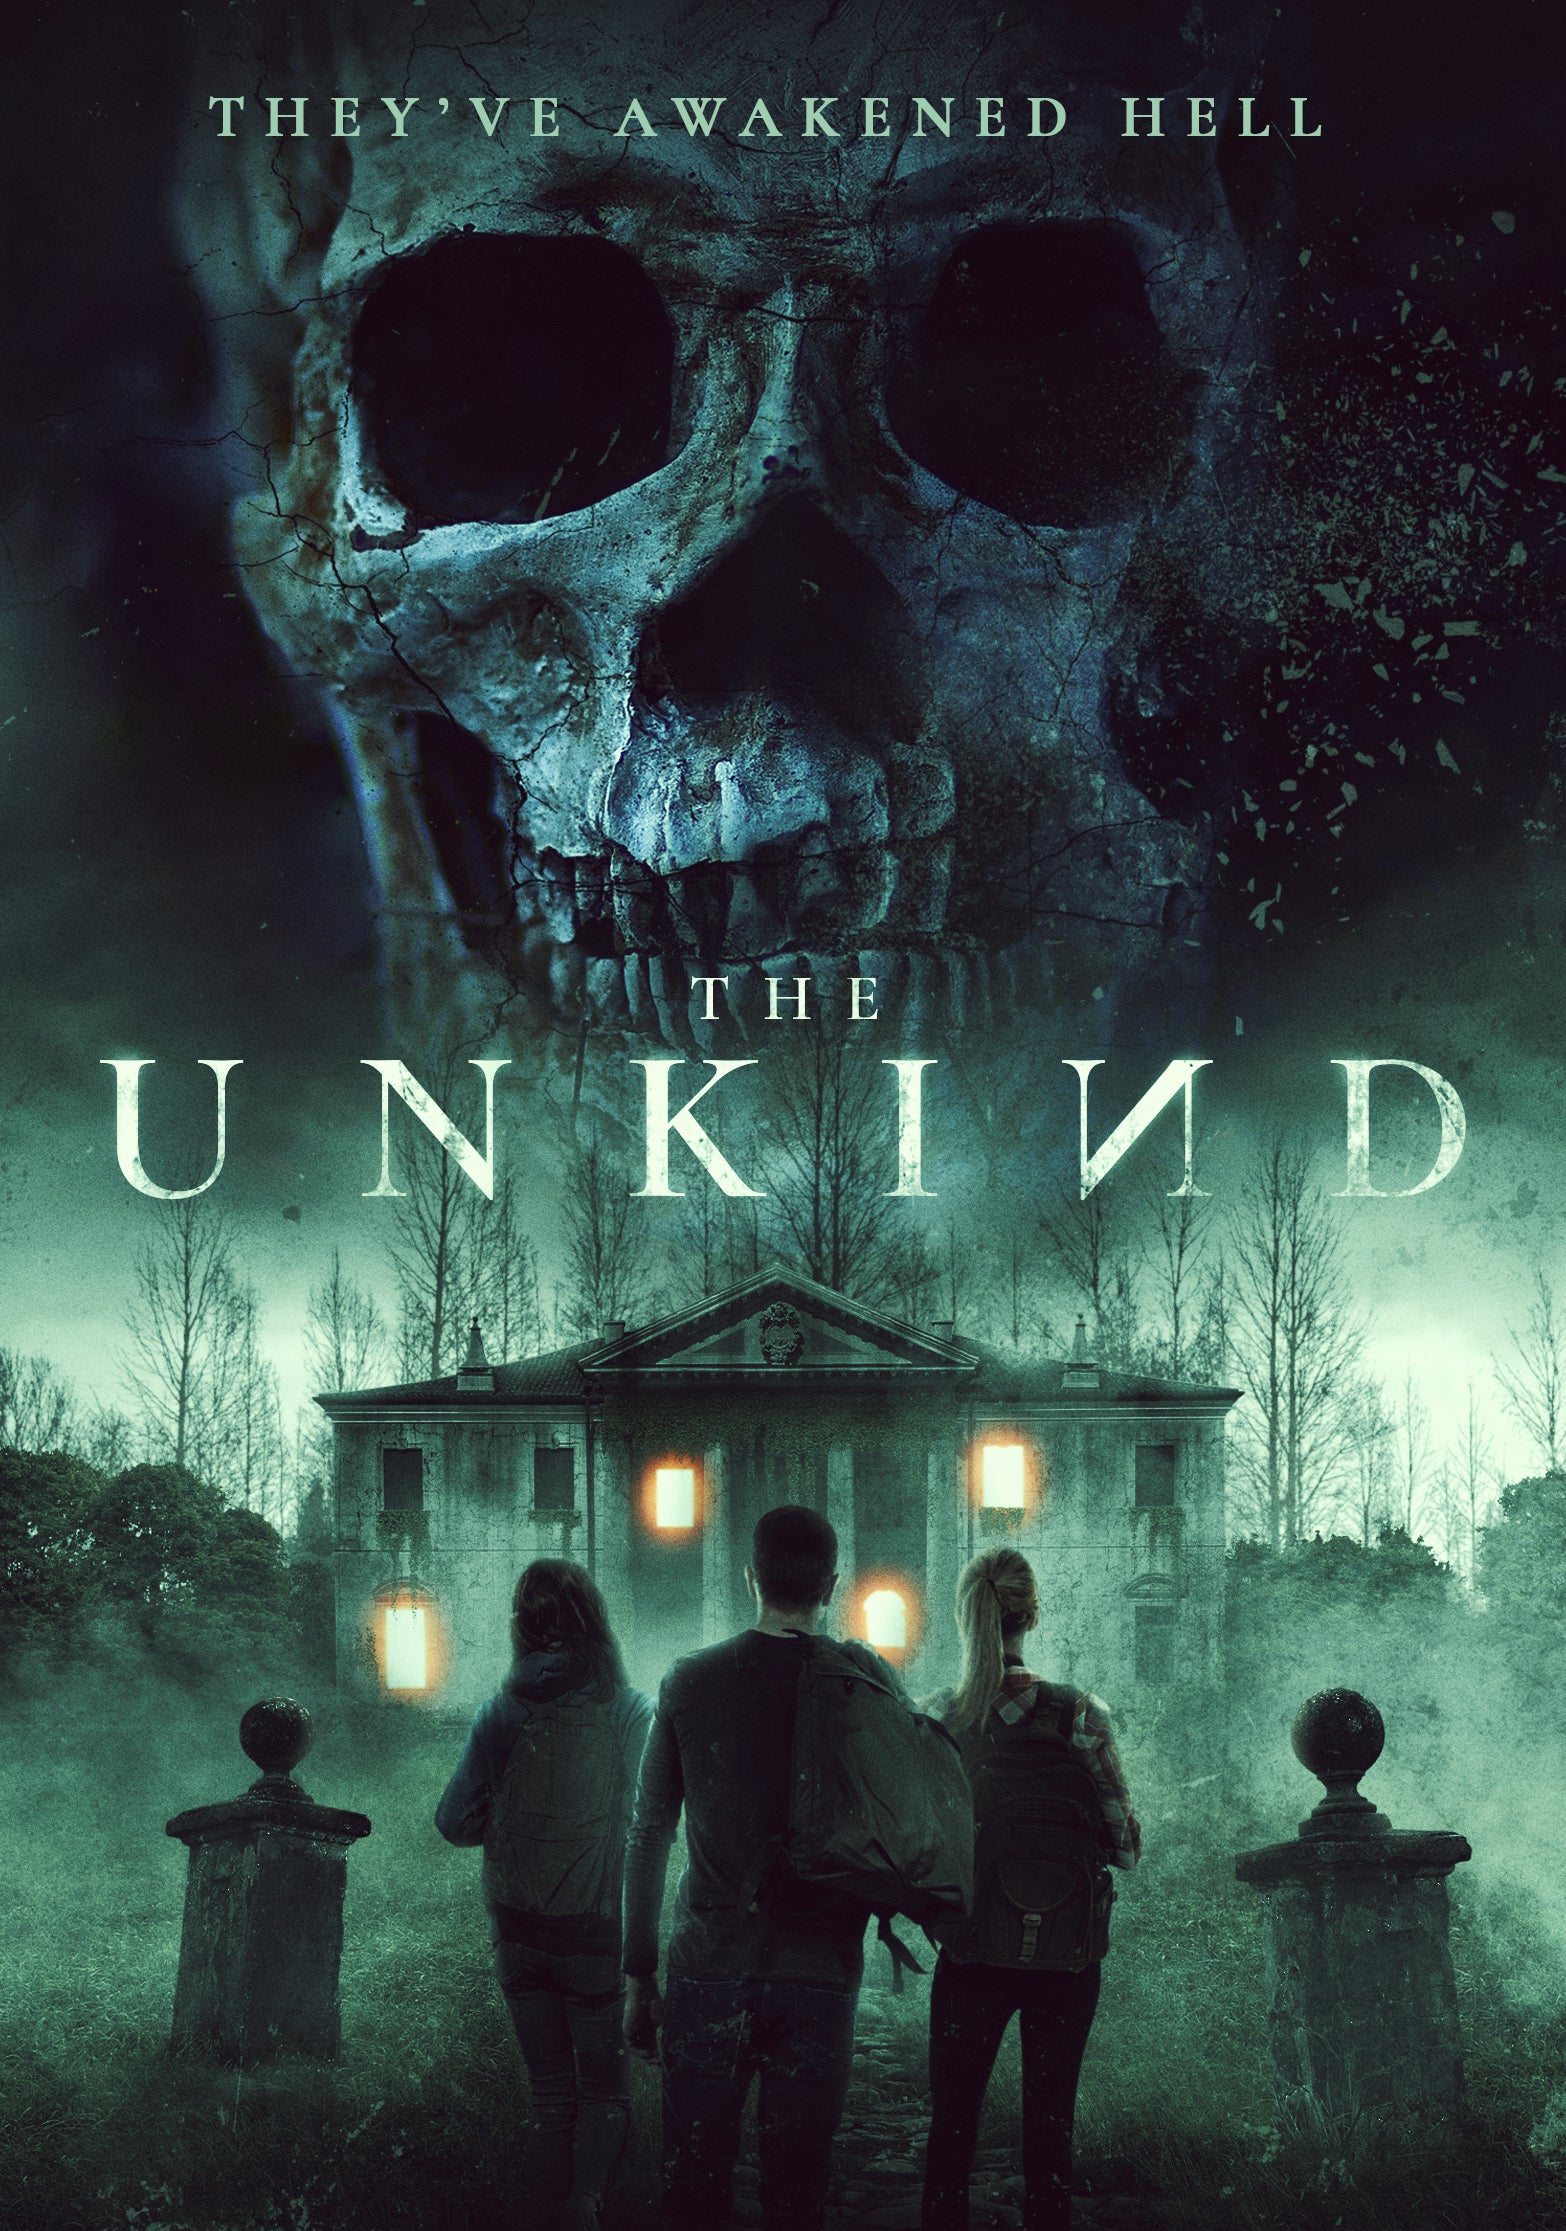 THE UNKIND DVD